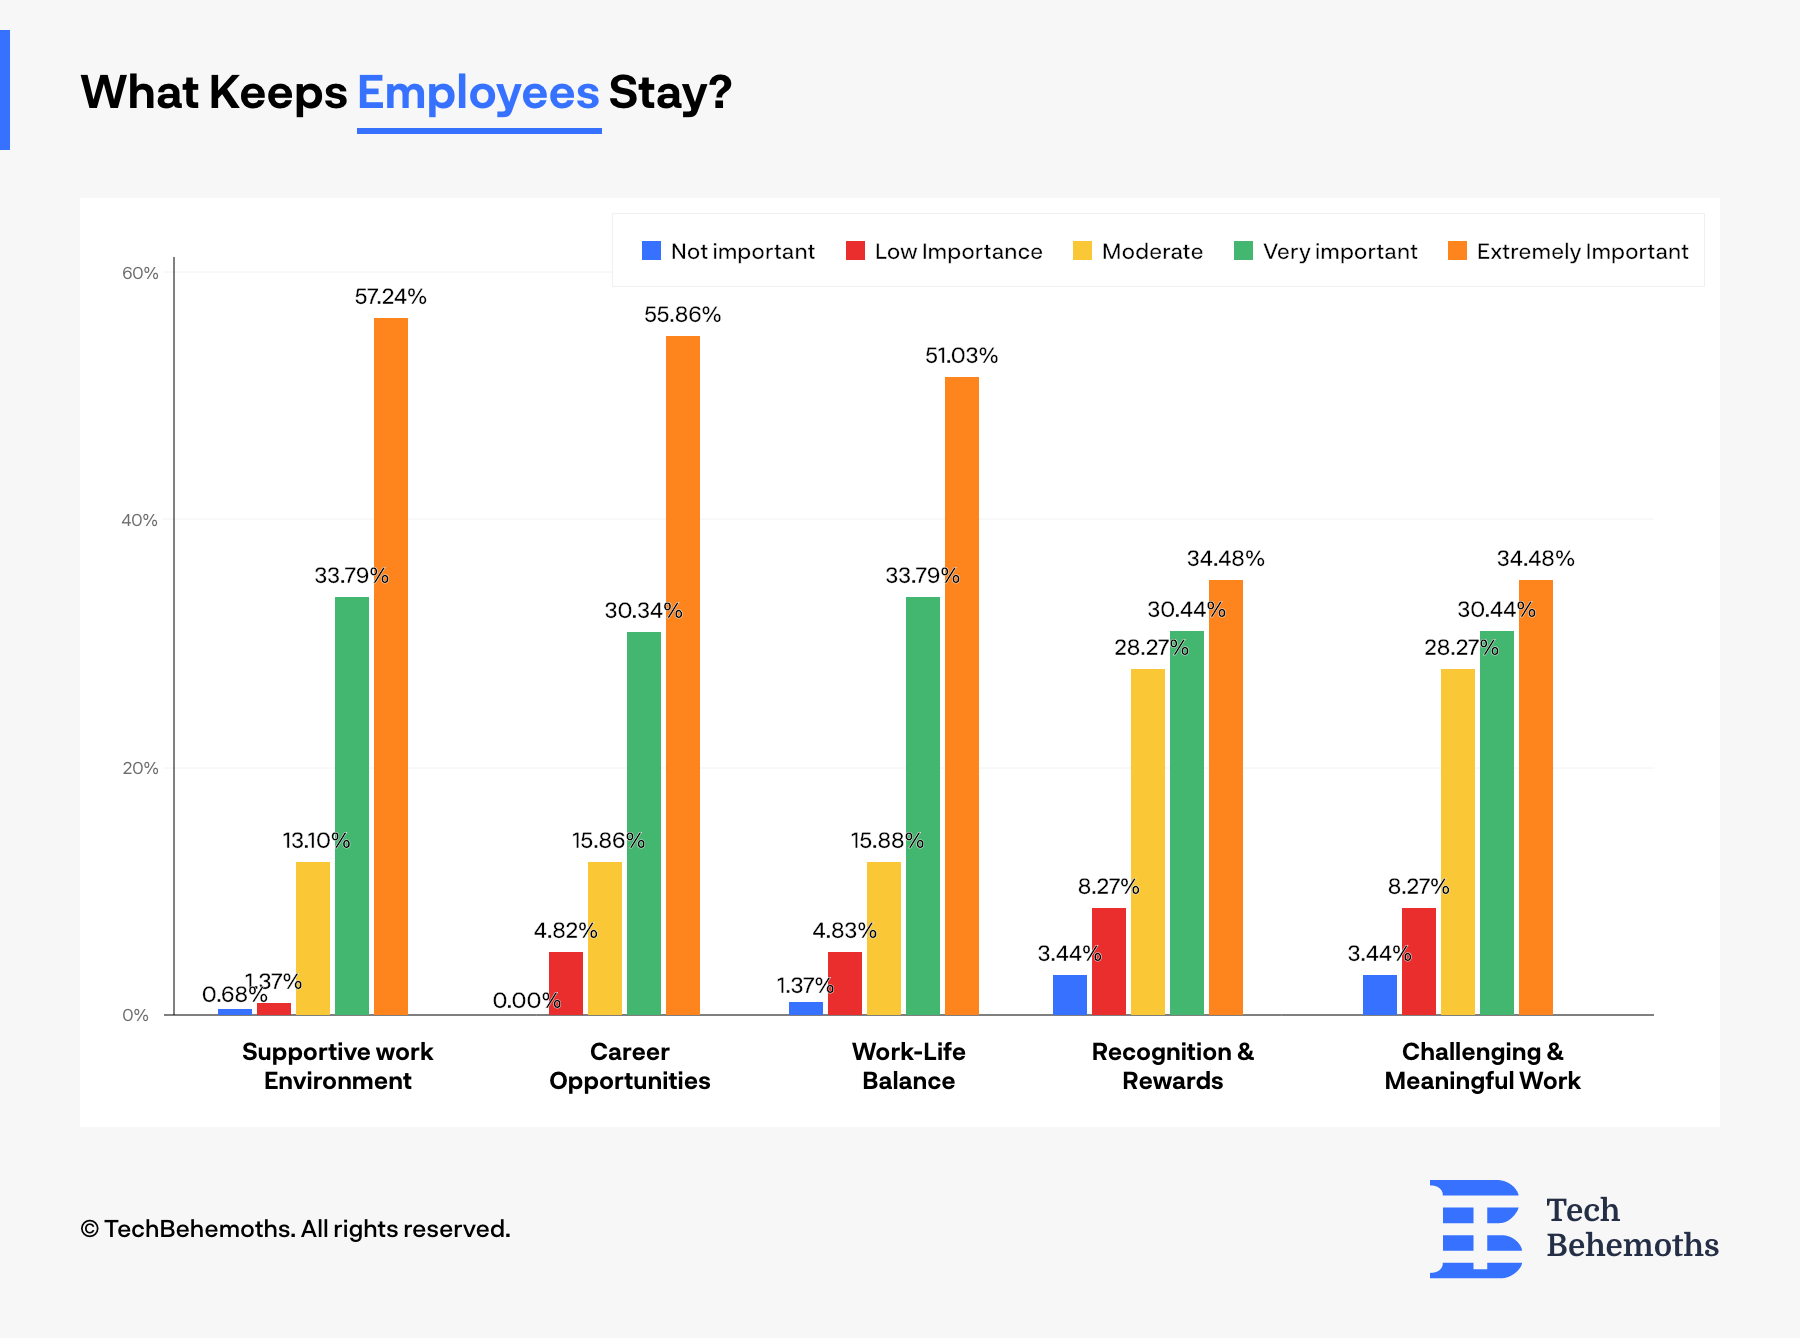 55.86% of employees state that clear career oportunities motivates them to stay with their current company